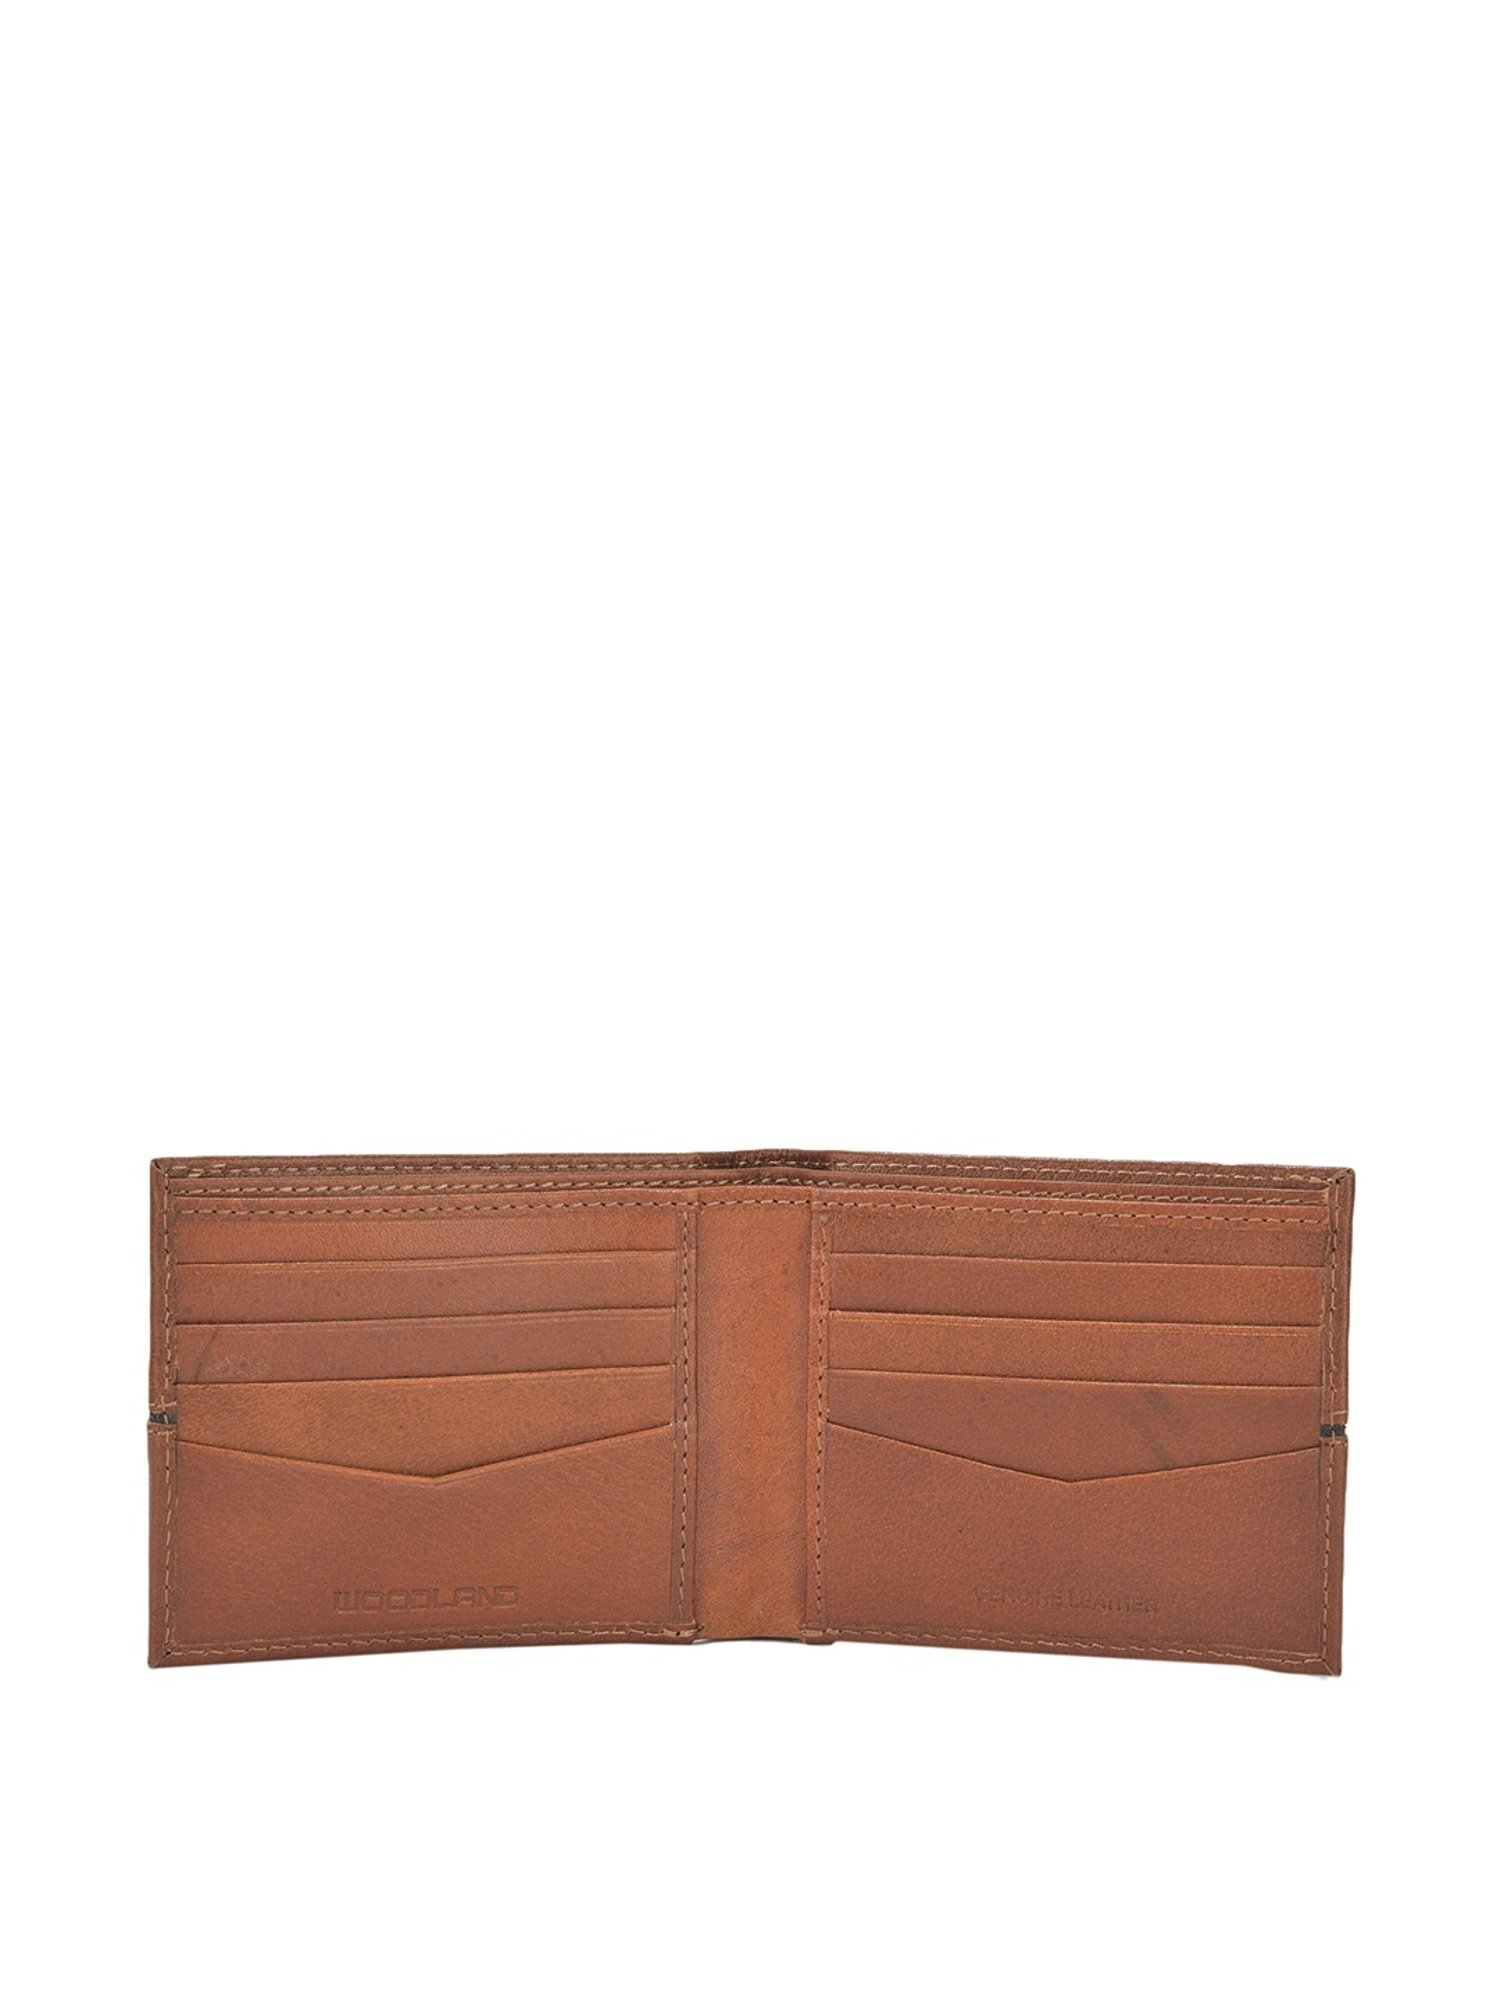 Woodland - Landscape wallet with space for 11 credit cards made from  natural, soft buffalo leather i-42729